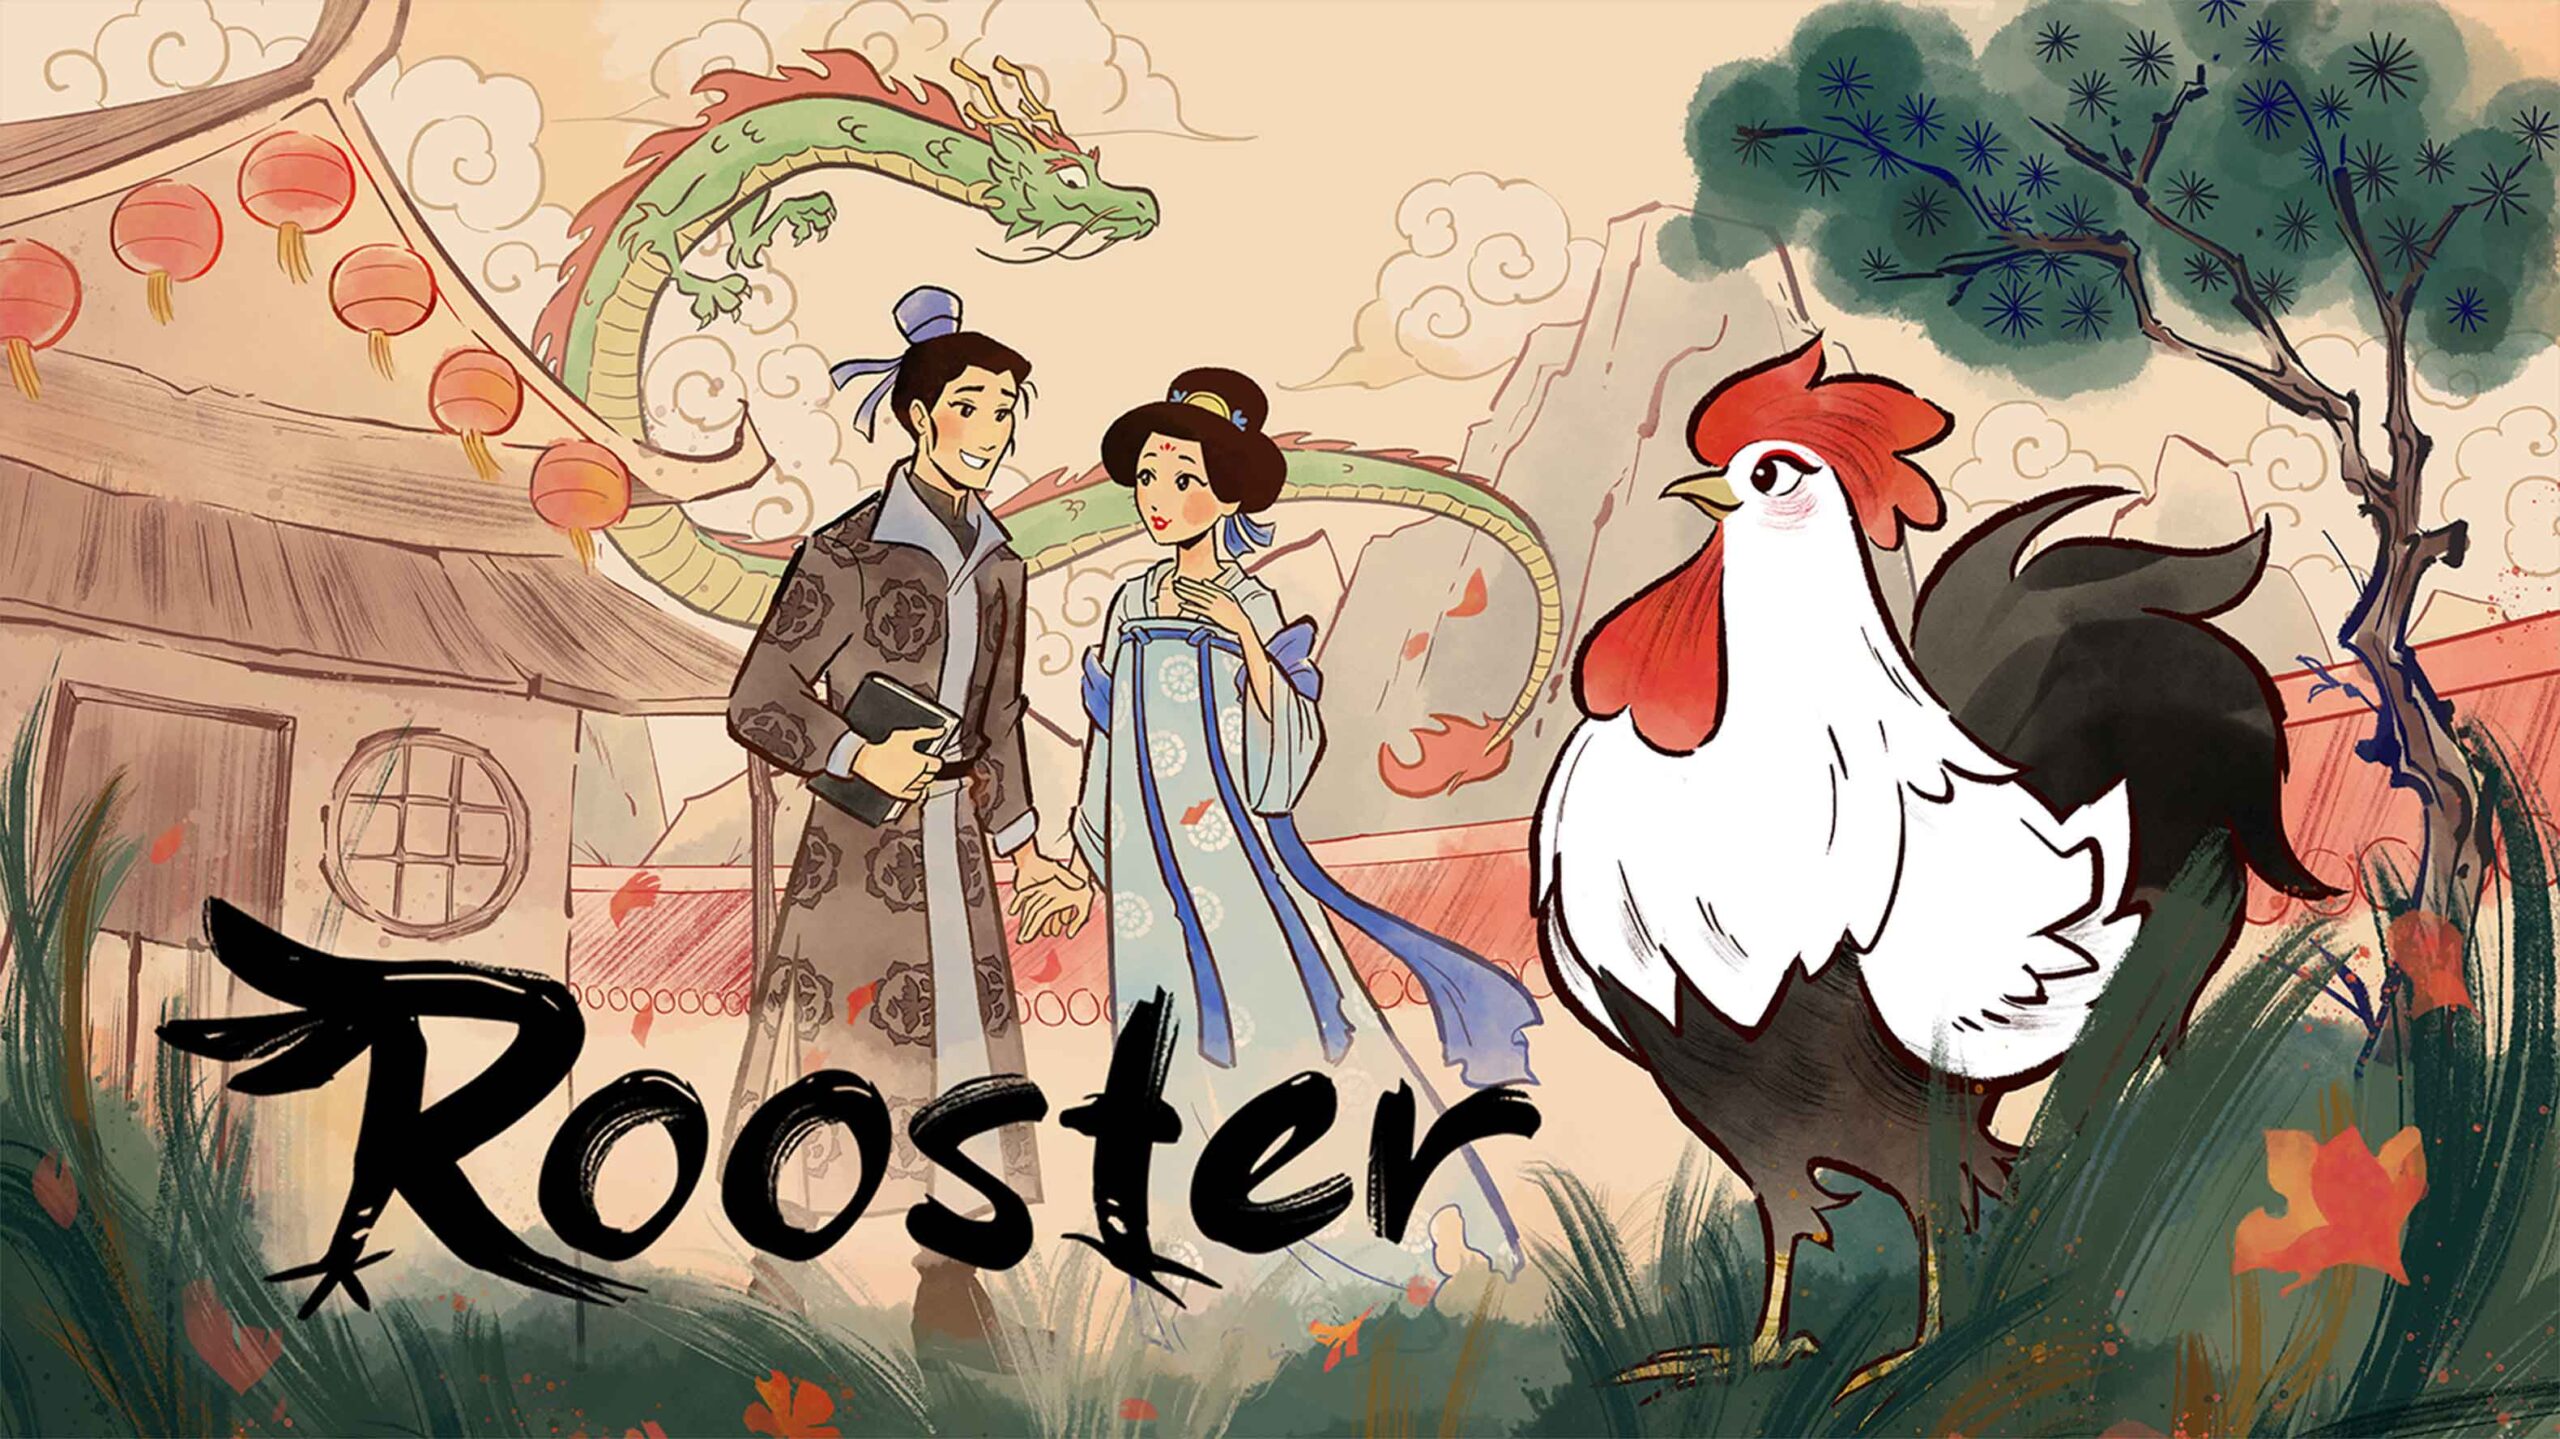 Toronto’s Sticky Brain celebrates Chinese culture and accessibility in Rooster